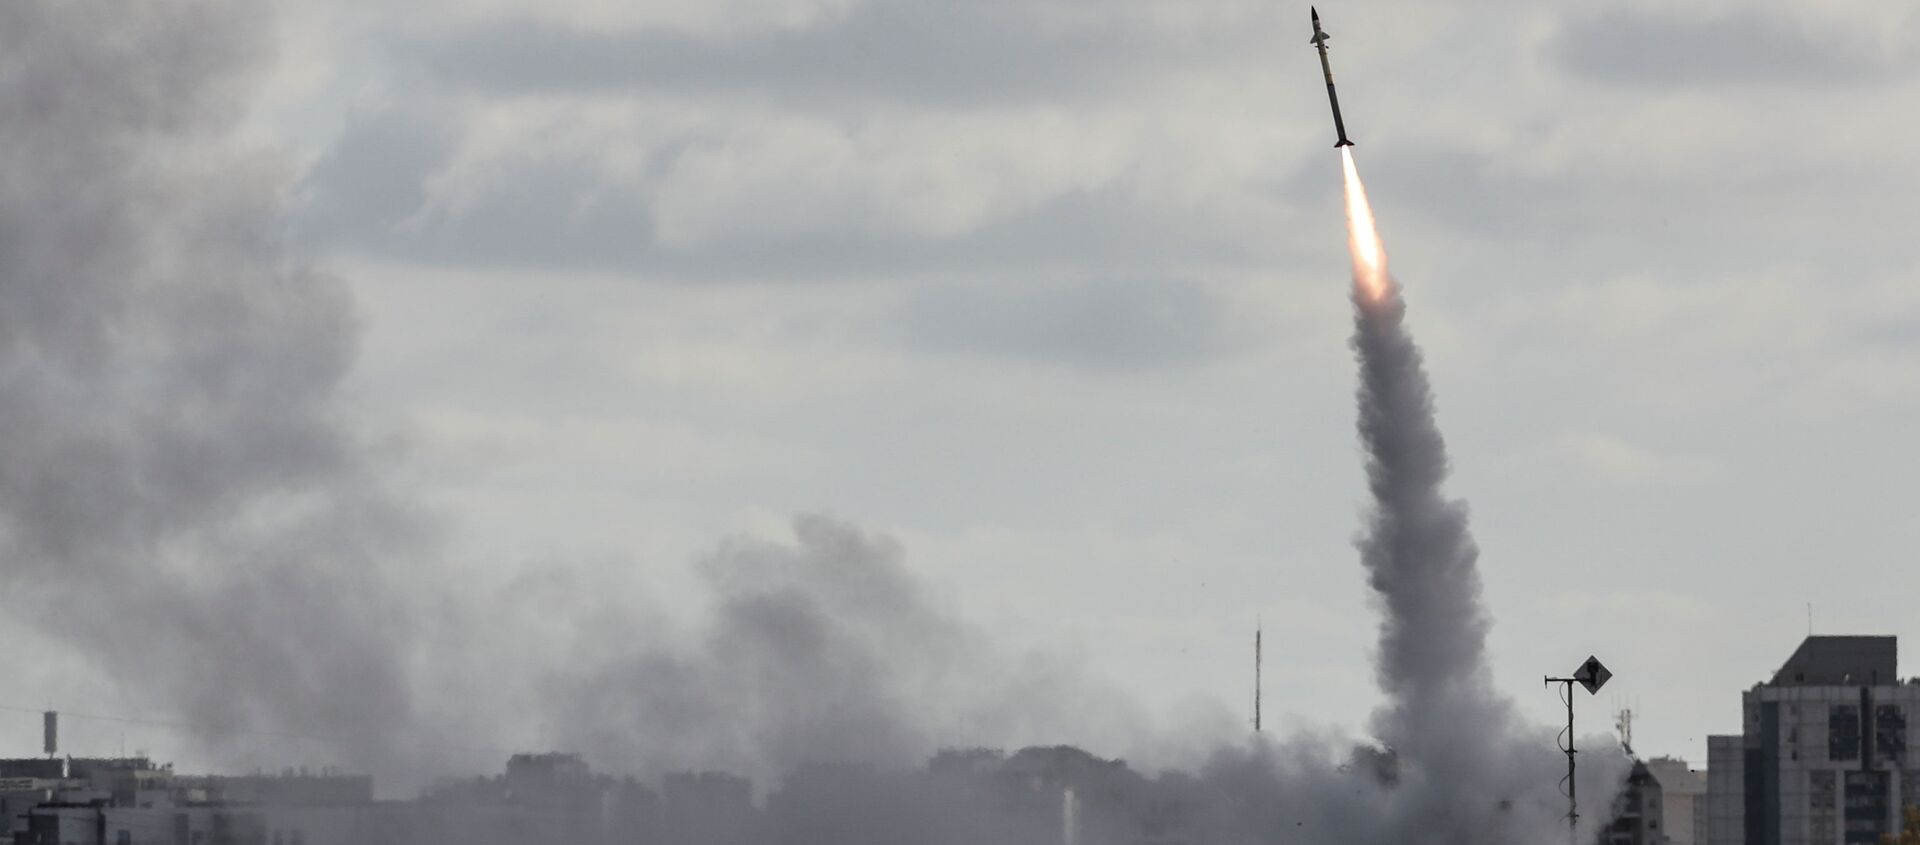 Israel's Iron Dome anti-missile system fires to intercept a rocket launched from the Gaza Strip towards Israel, as seen from Ashdod, Israel May 17, 2021 - Sputnik International, 1920